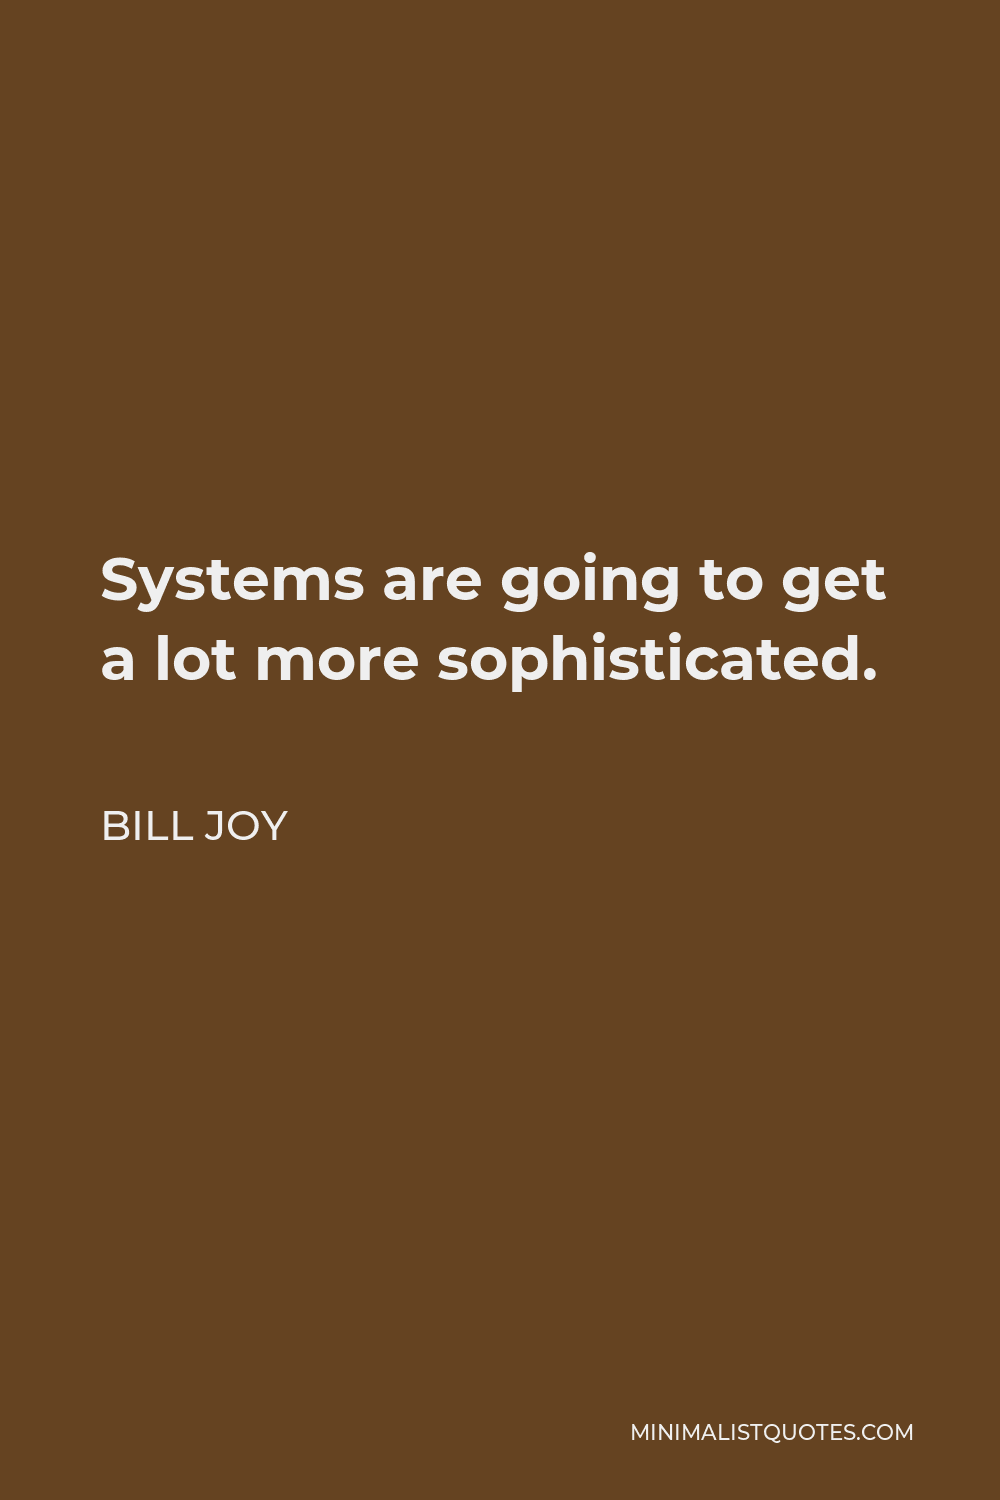 Bill Joy Quote - Systems are going to get a lot more sophisticated.